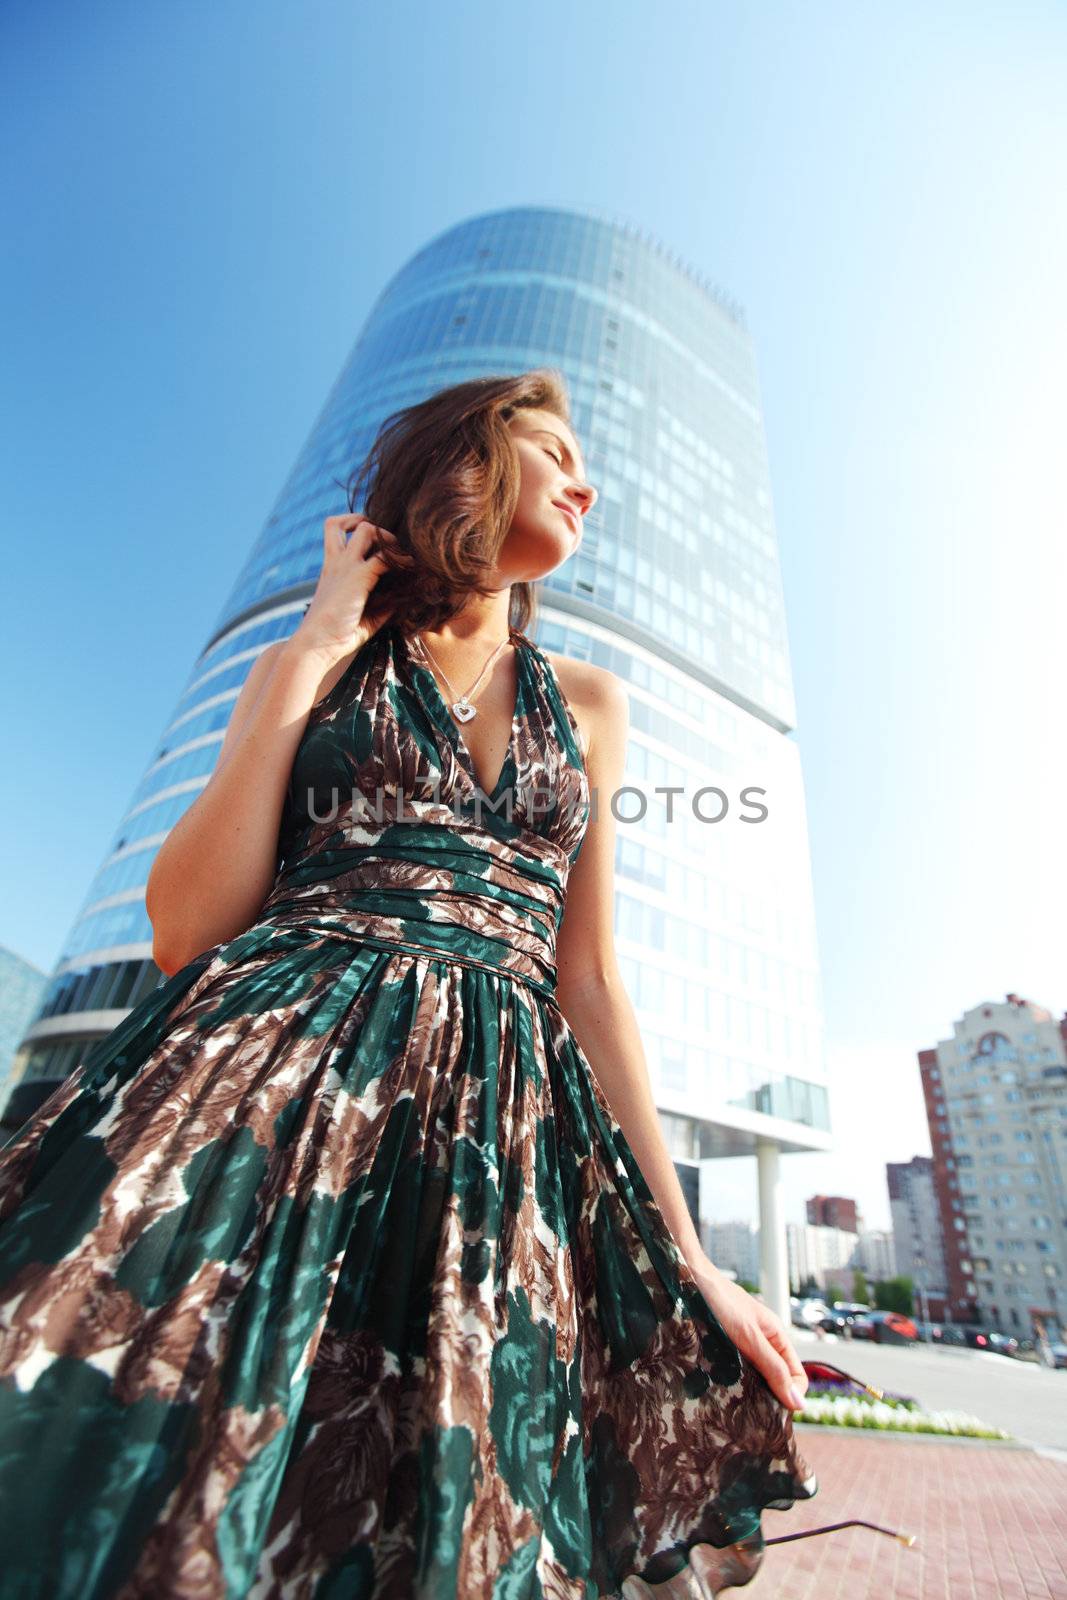  glamorous girl in the background of a skyscraper